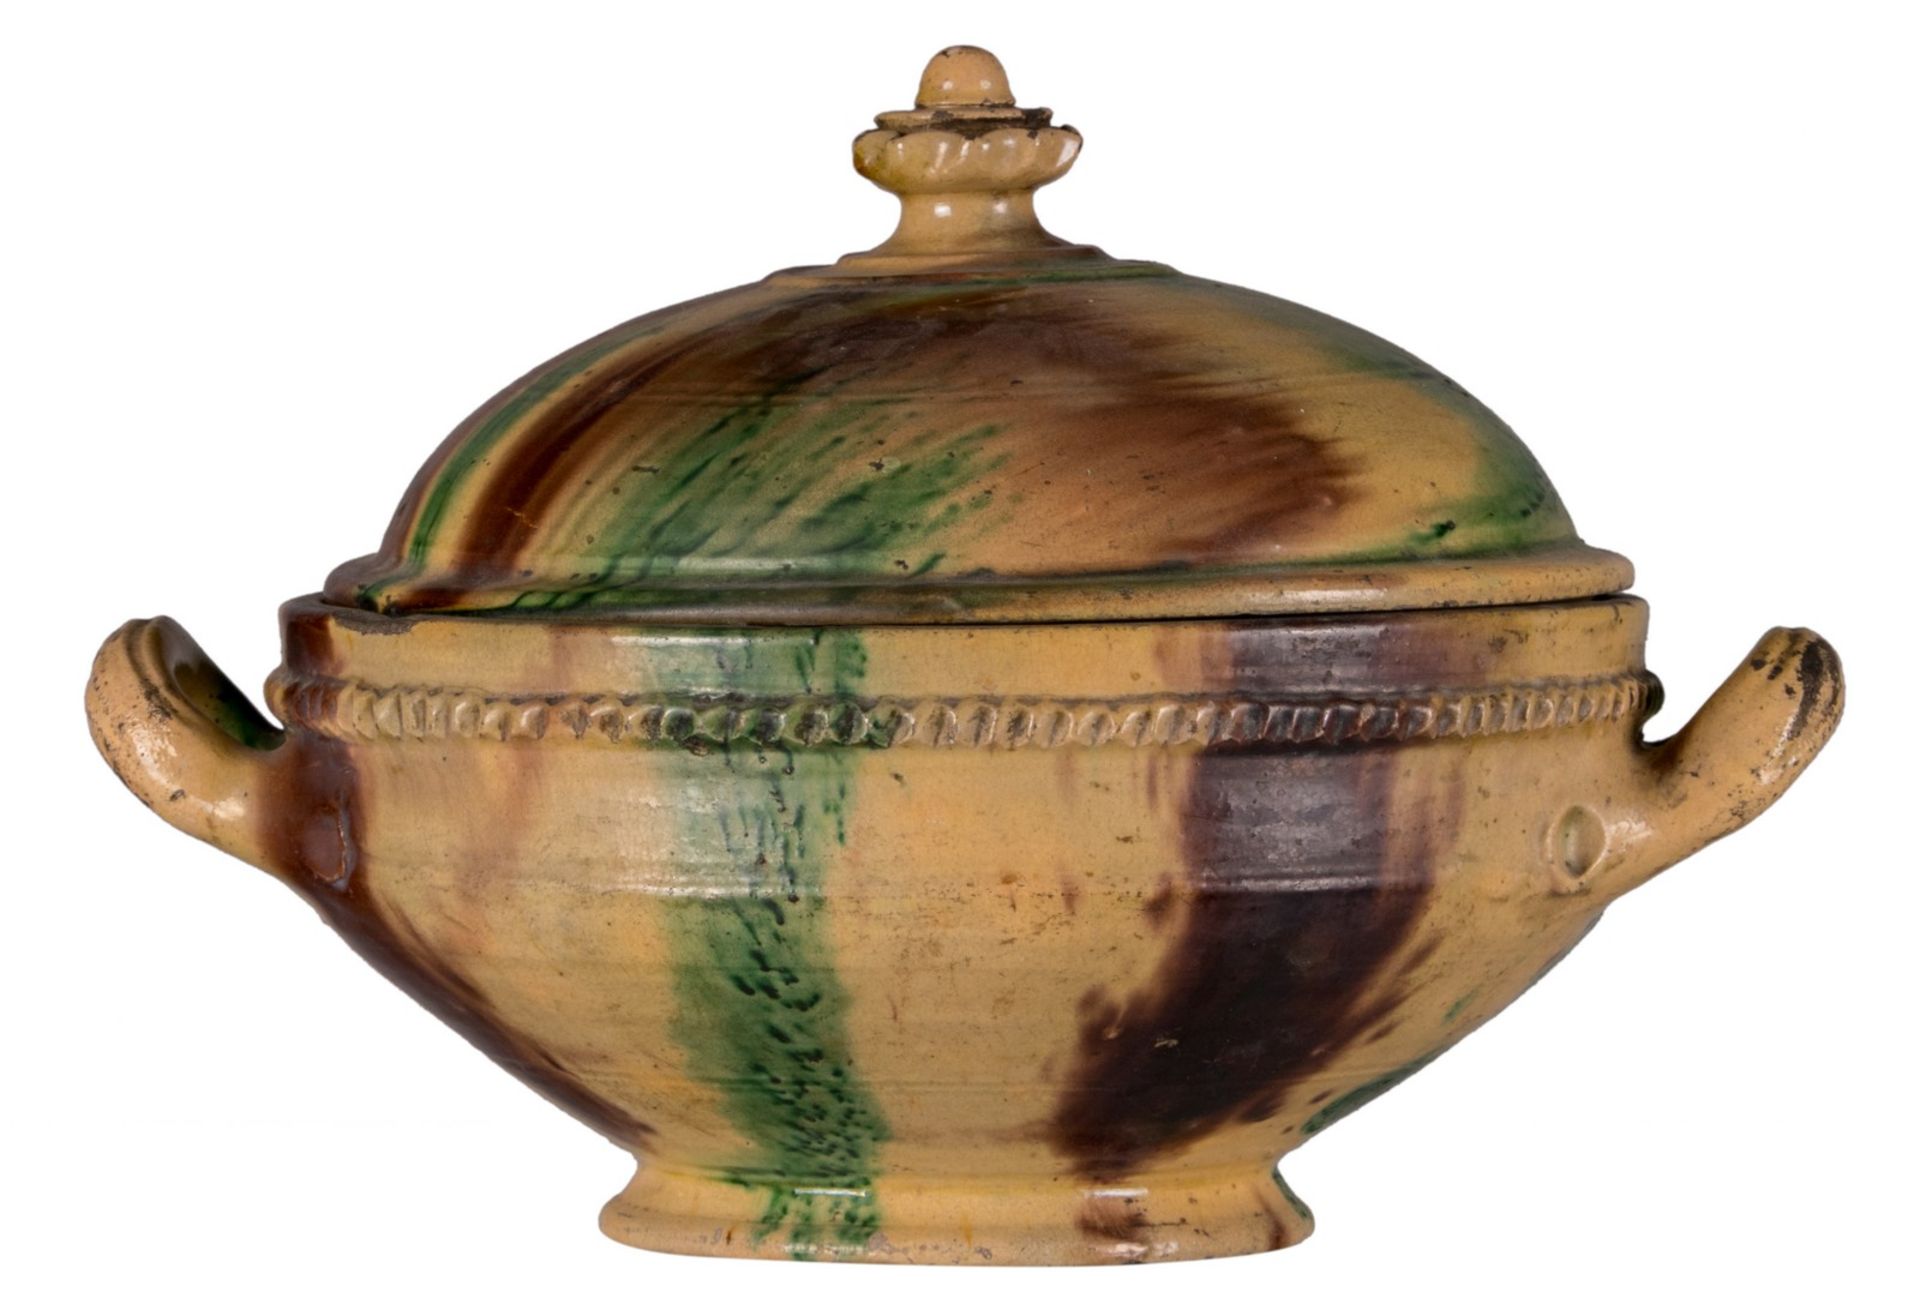 A 19thC polychrome decorated earthenware tureen, H 25 - W 34 cm